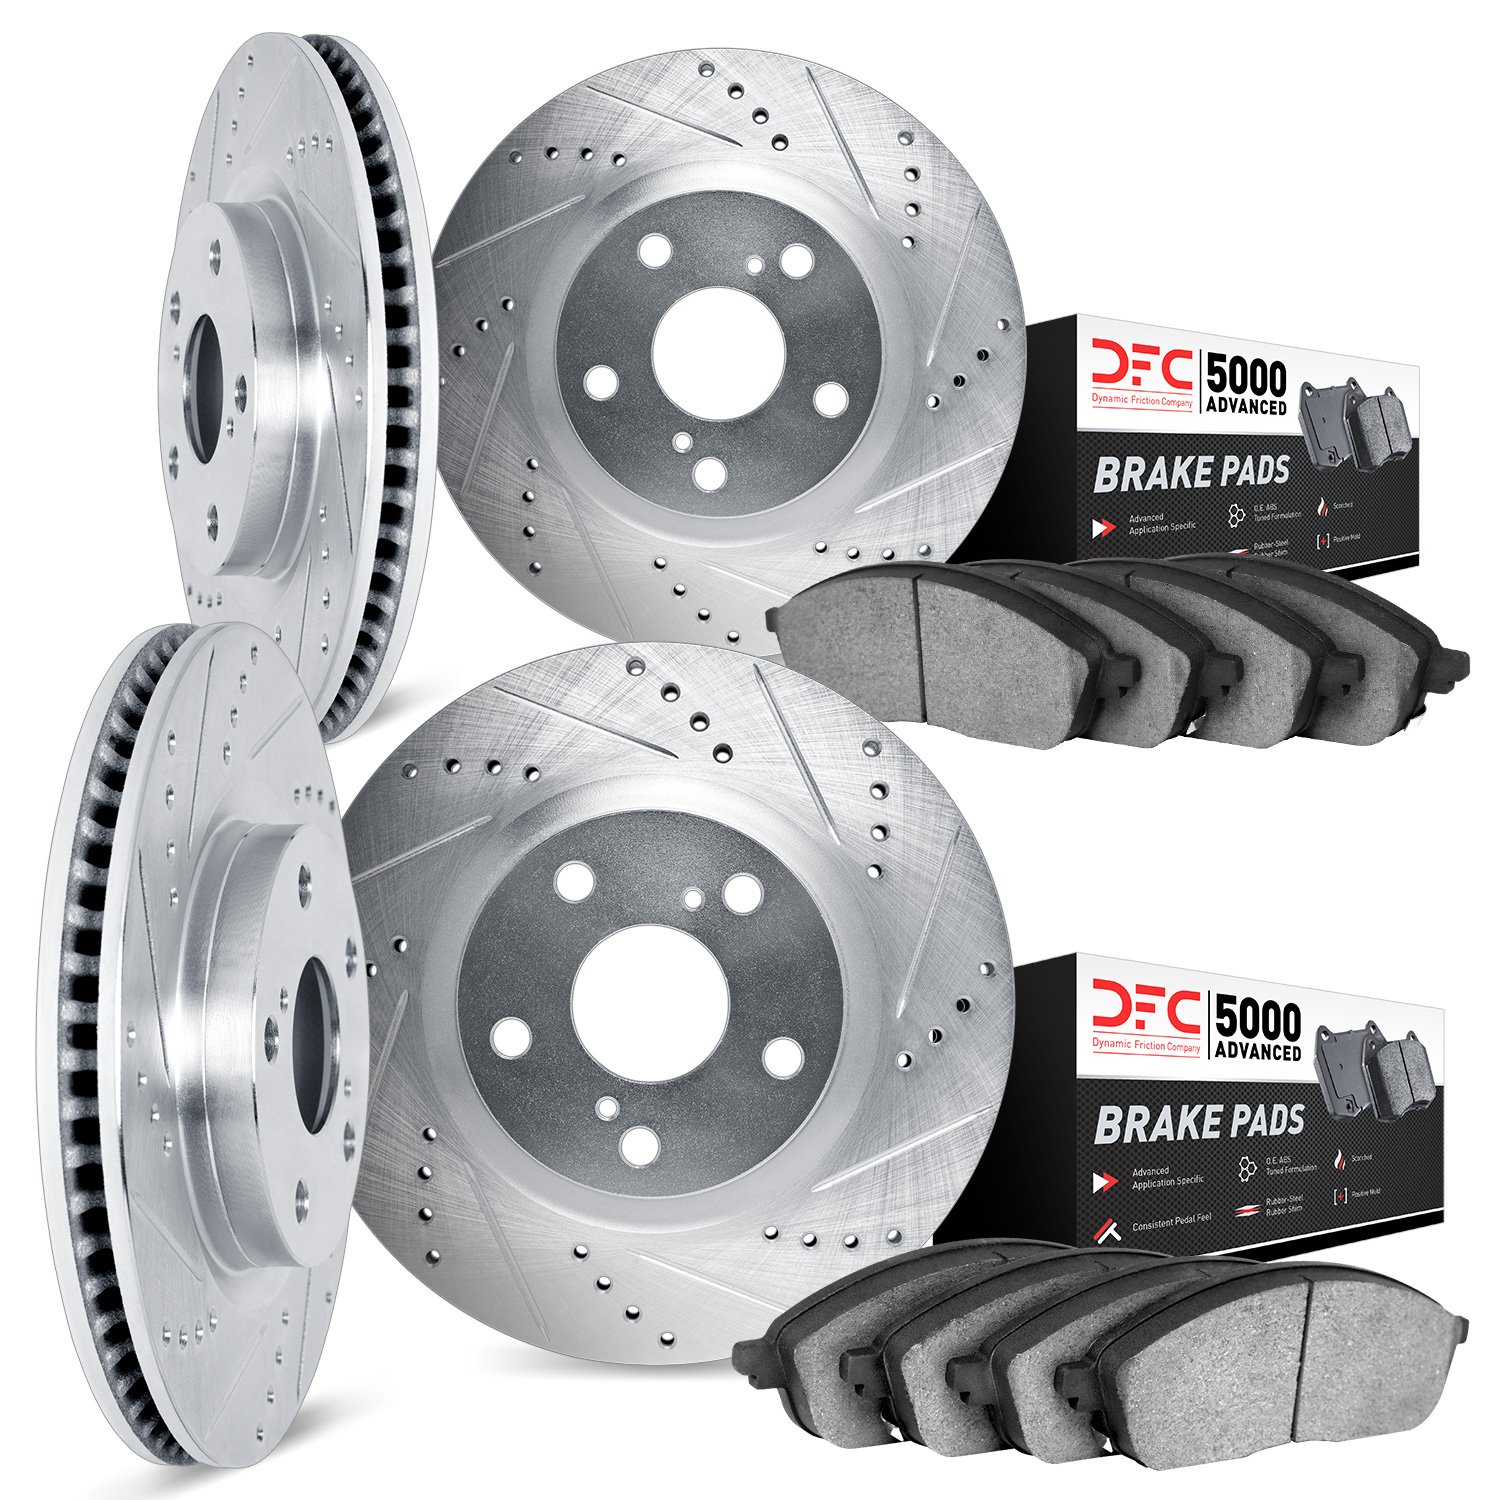 7504-54285 Drilled/Slotted Brake Rotors w/5000 Advanced Brake Pads Kit [Silver], 2011-2014 Ford/Lincoln/Mercury/Mazda, Position: